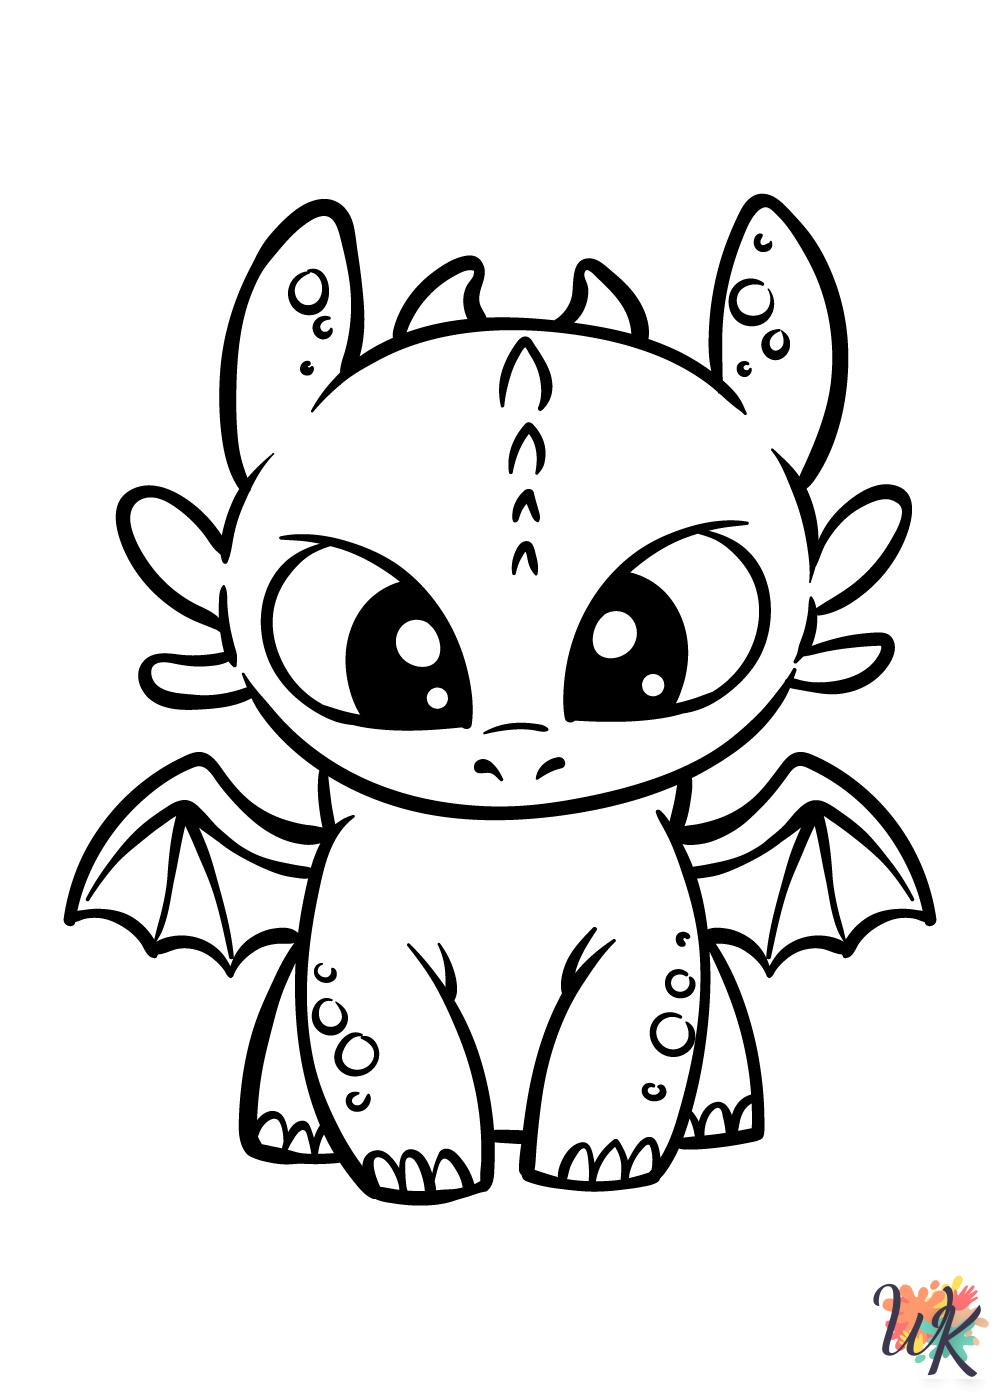 preschool How To Train Your Dragon coloring pages